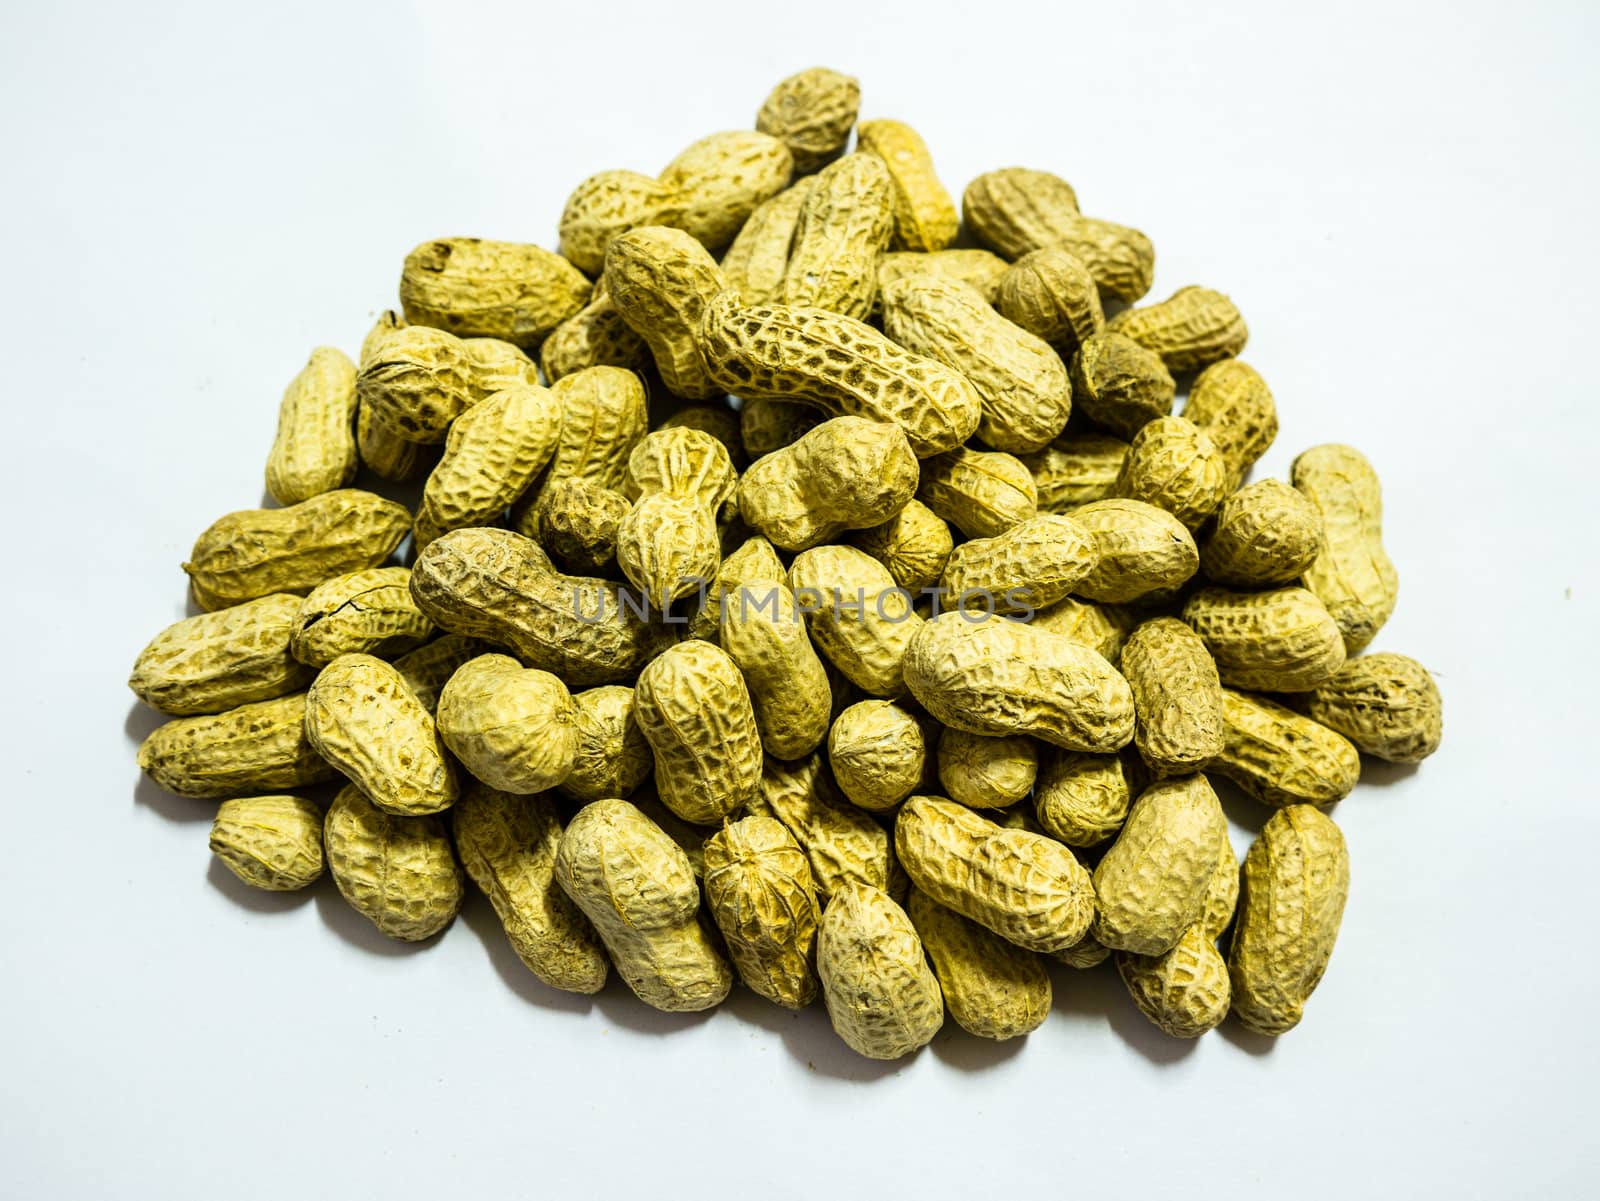 Peanuts have many uses. They can be eaten raw, used in recipes, made into solvents and oils, medicines, textile materials, and peanut butter, as well as many other uses